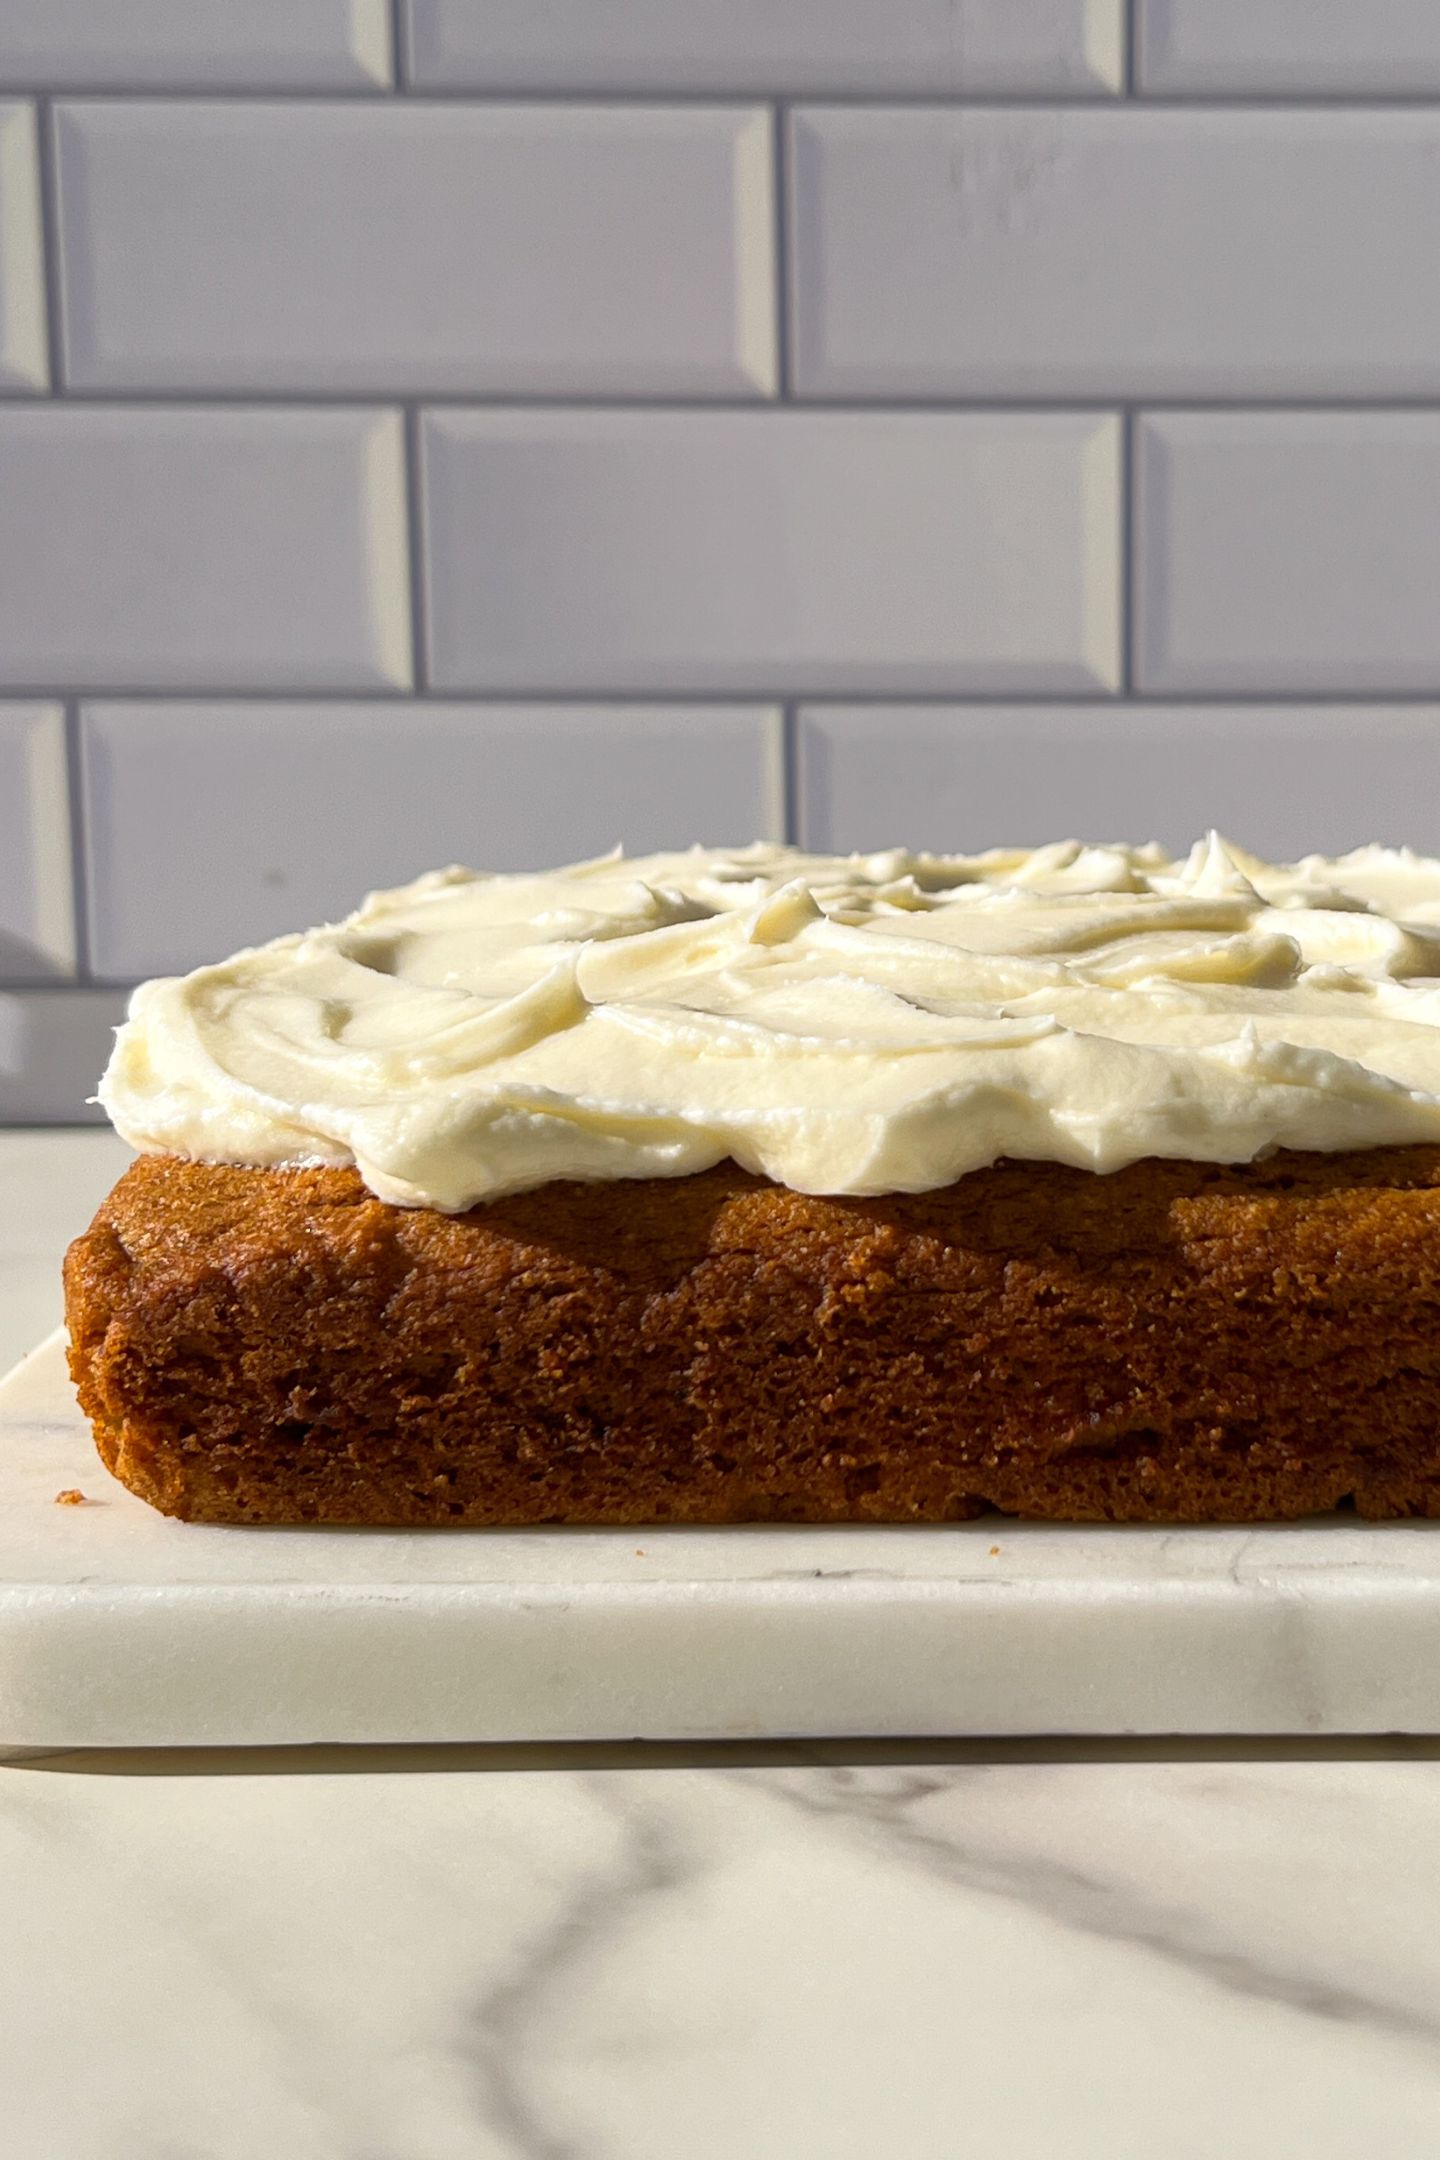 Frosting smoothed out on the pumpkin snack cake.